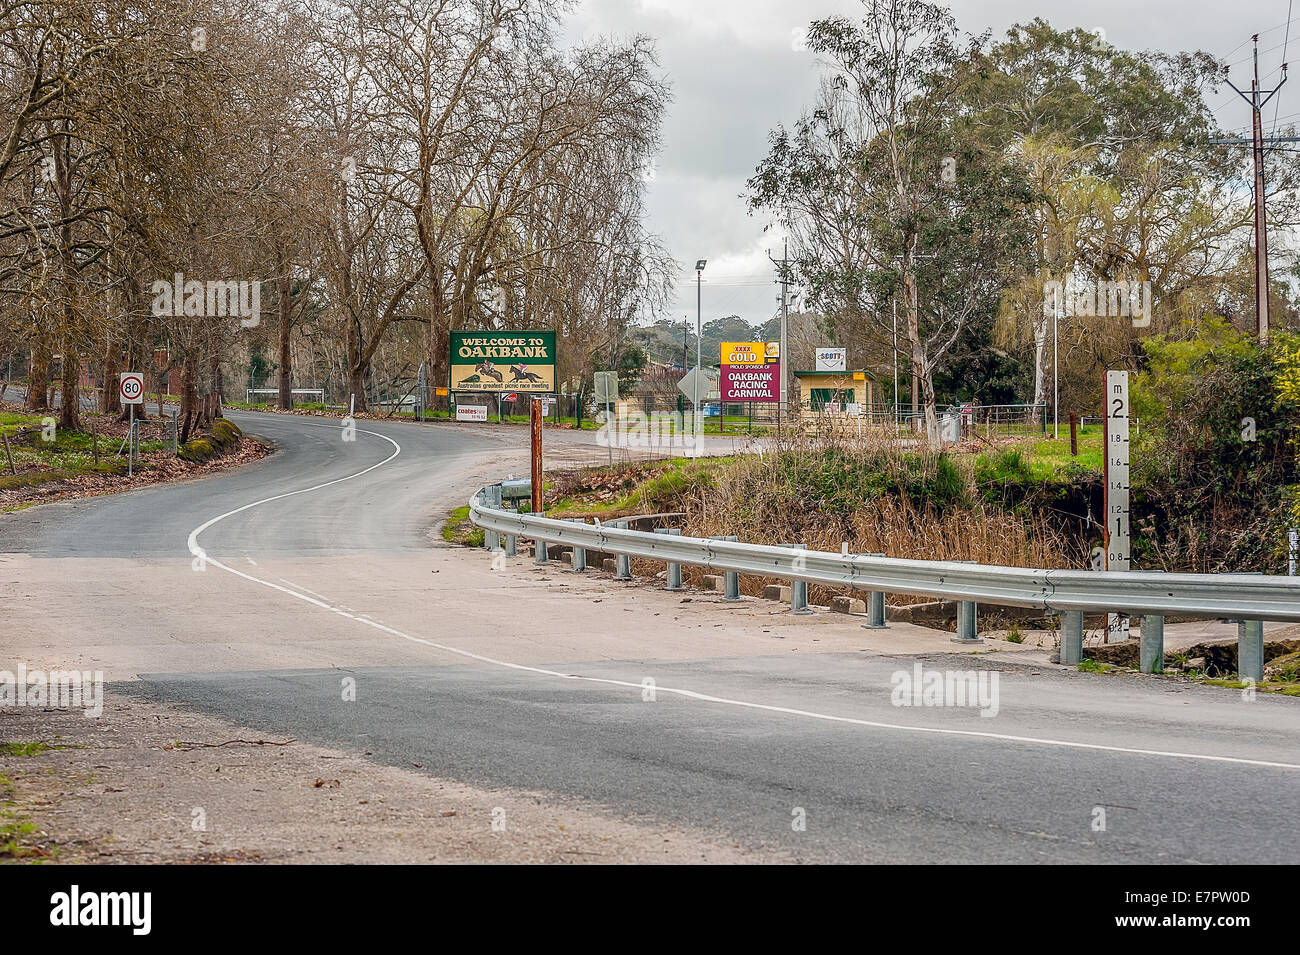 The road leading to the Oakbank Race course in South Australia Stock Photo